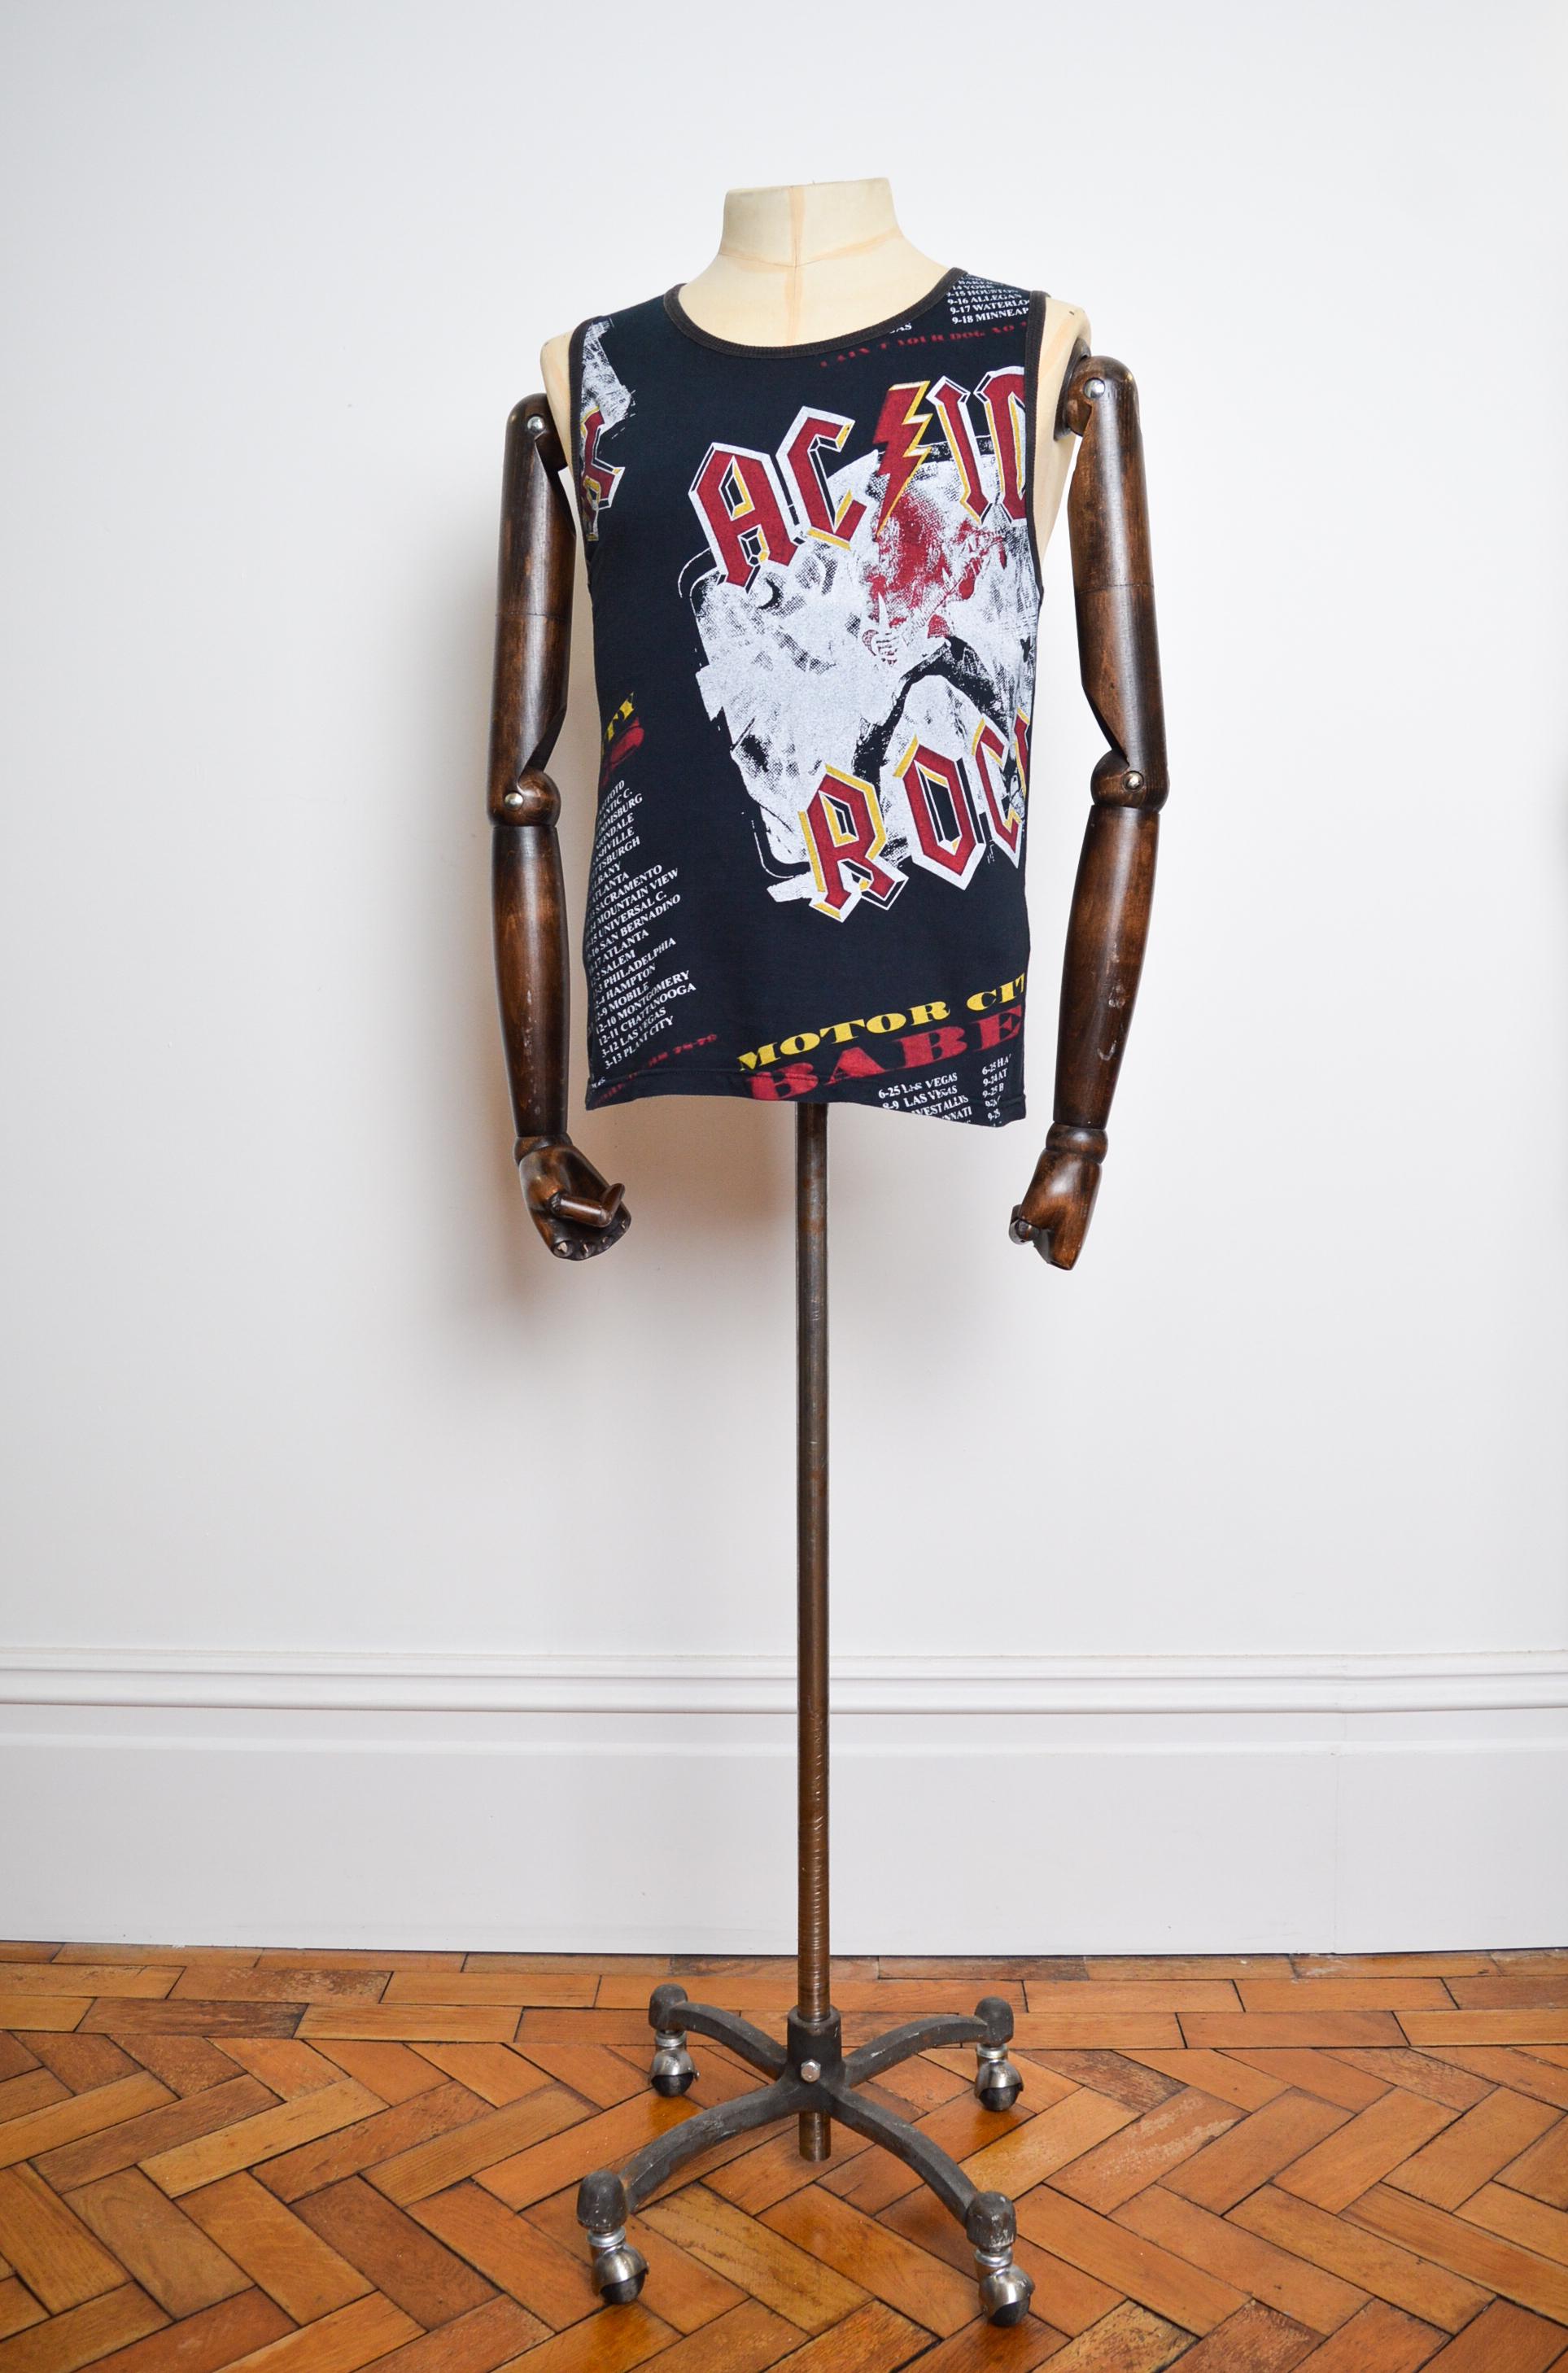 Fun 2001 Dolce & Gabbana Tank top with ACDC Rock band print, crafted from a printed cotton, with ribbed collar line and sleeve trim

MADE IN ITALY.      

100% Cotton   

Sizing measured in Inches:  
Pit to Pit: 19.5''  
Nape to Hem: 26'' 